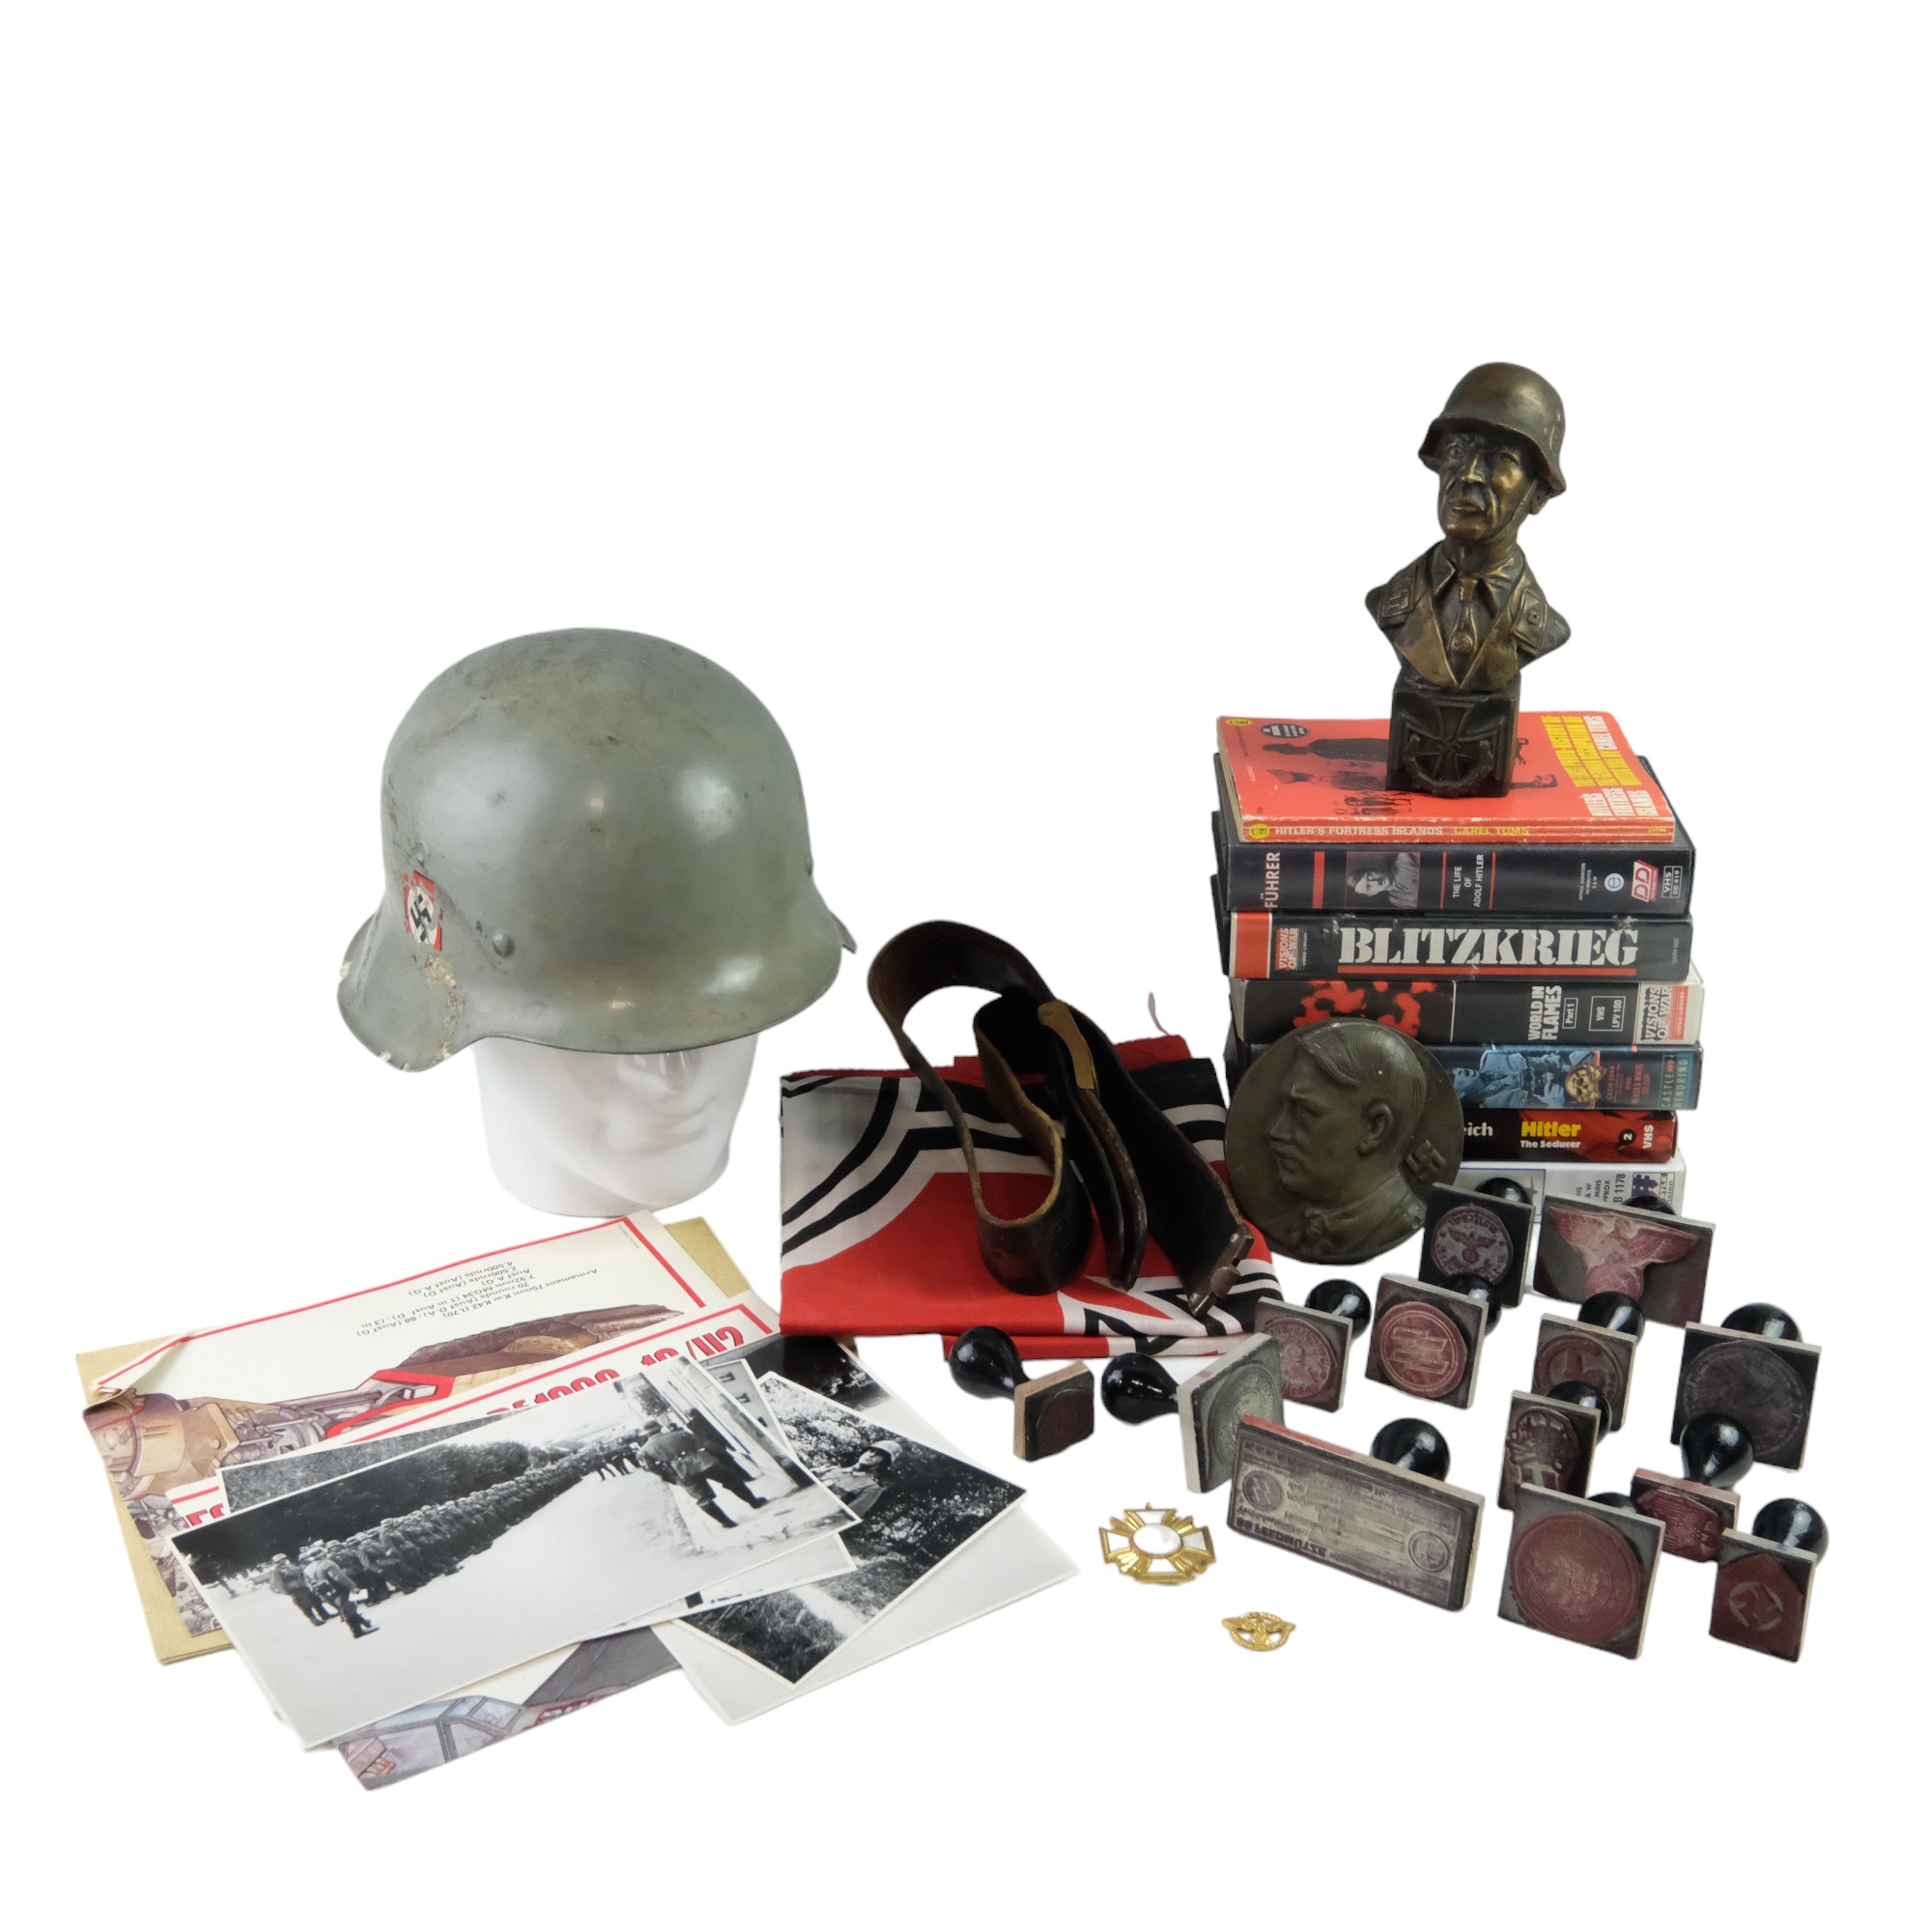 A quantity of late 20th Century books, video cassettes, ink stamps, a helmet, flag etc pertaining to